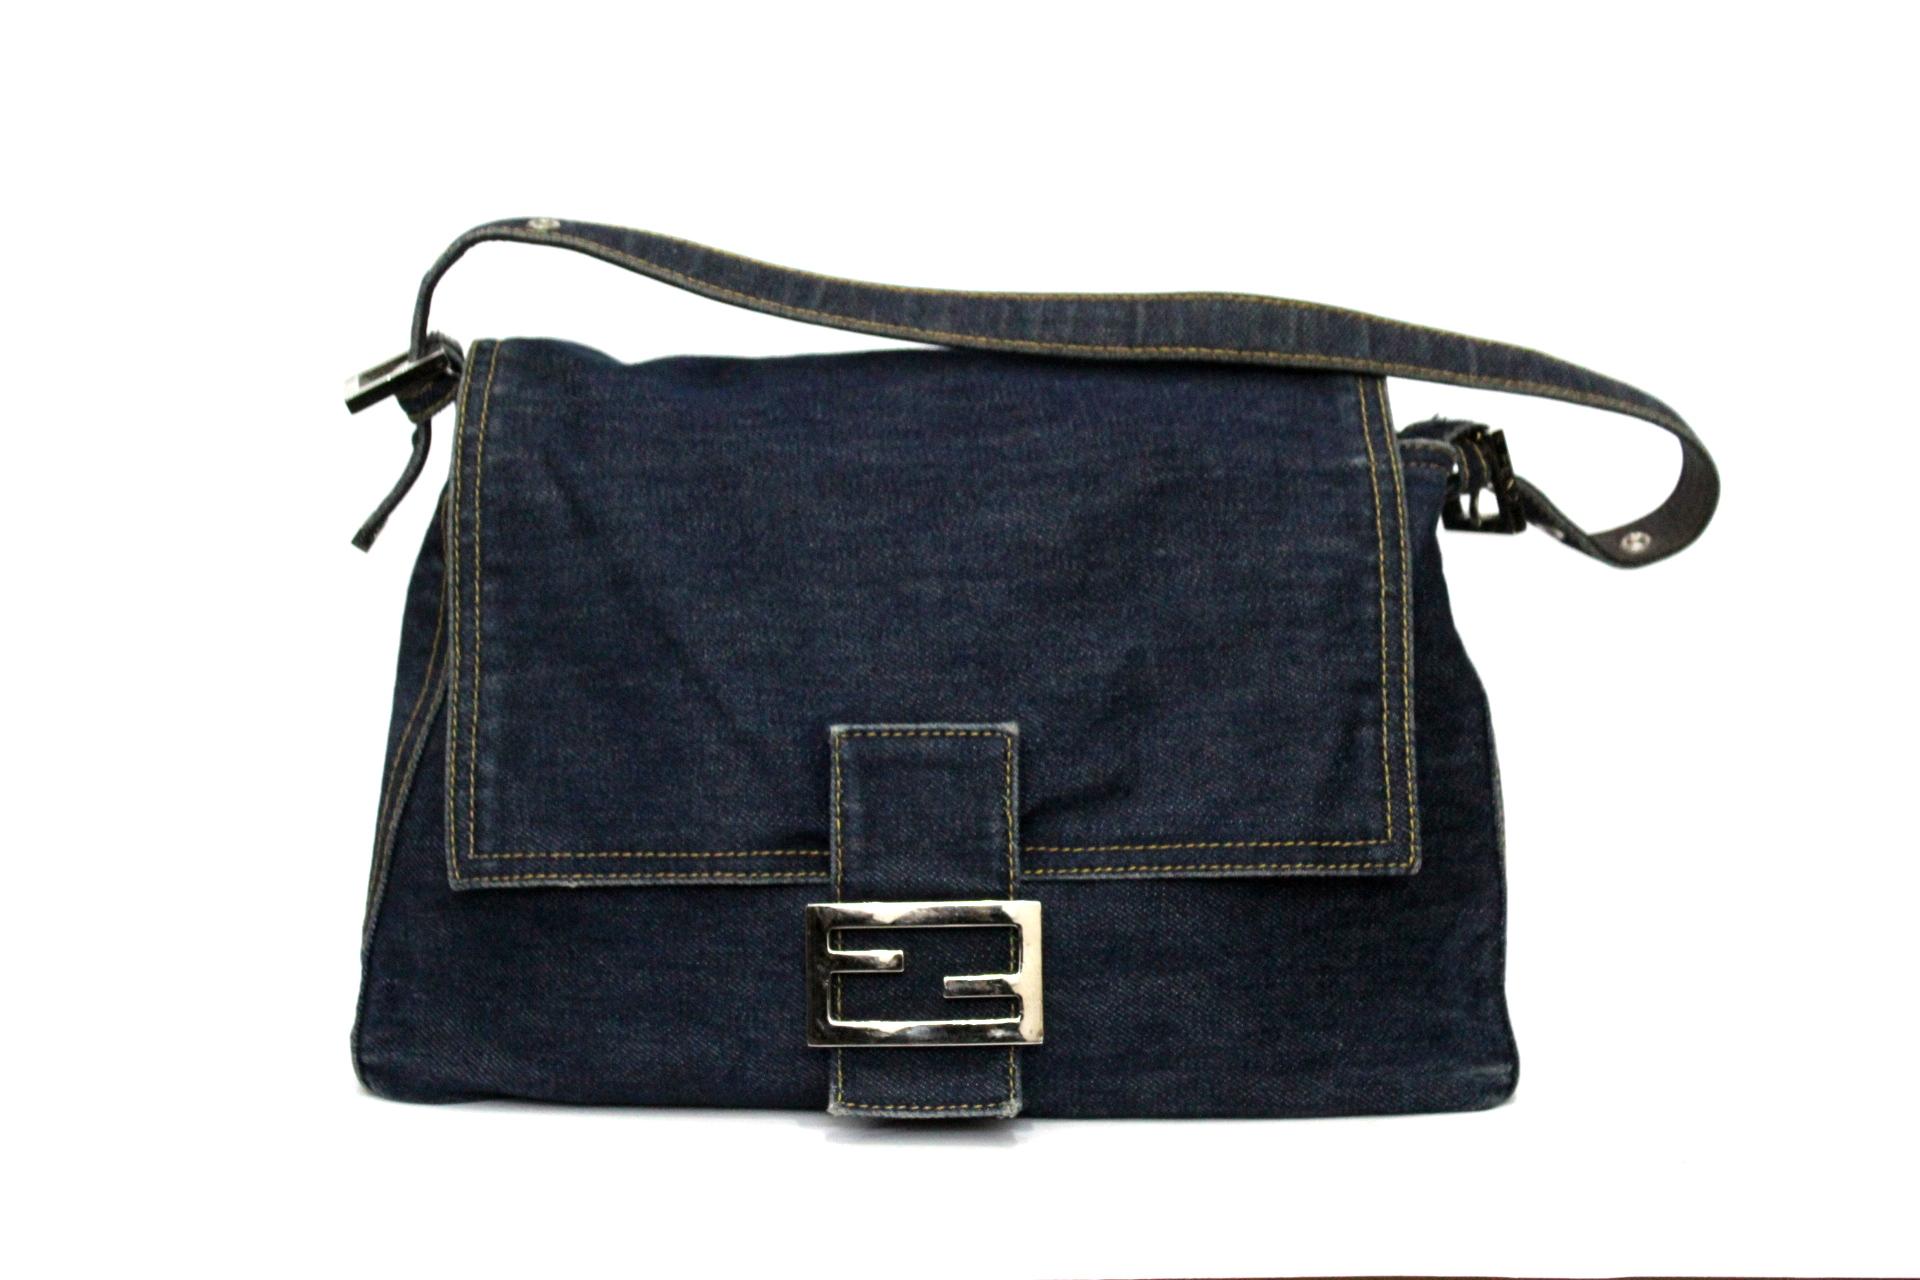 iconic Fendi Baguette bag made of jeans
magnetic flap closure
adjustable shoulder strap
very good condition both inside and outside